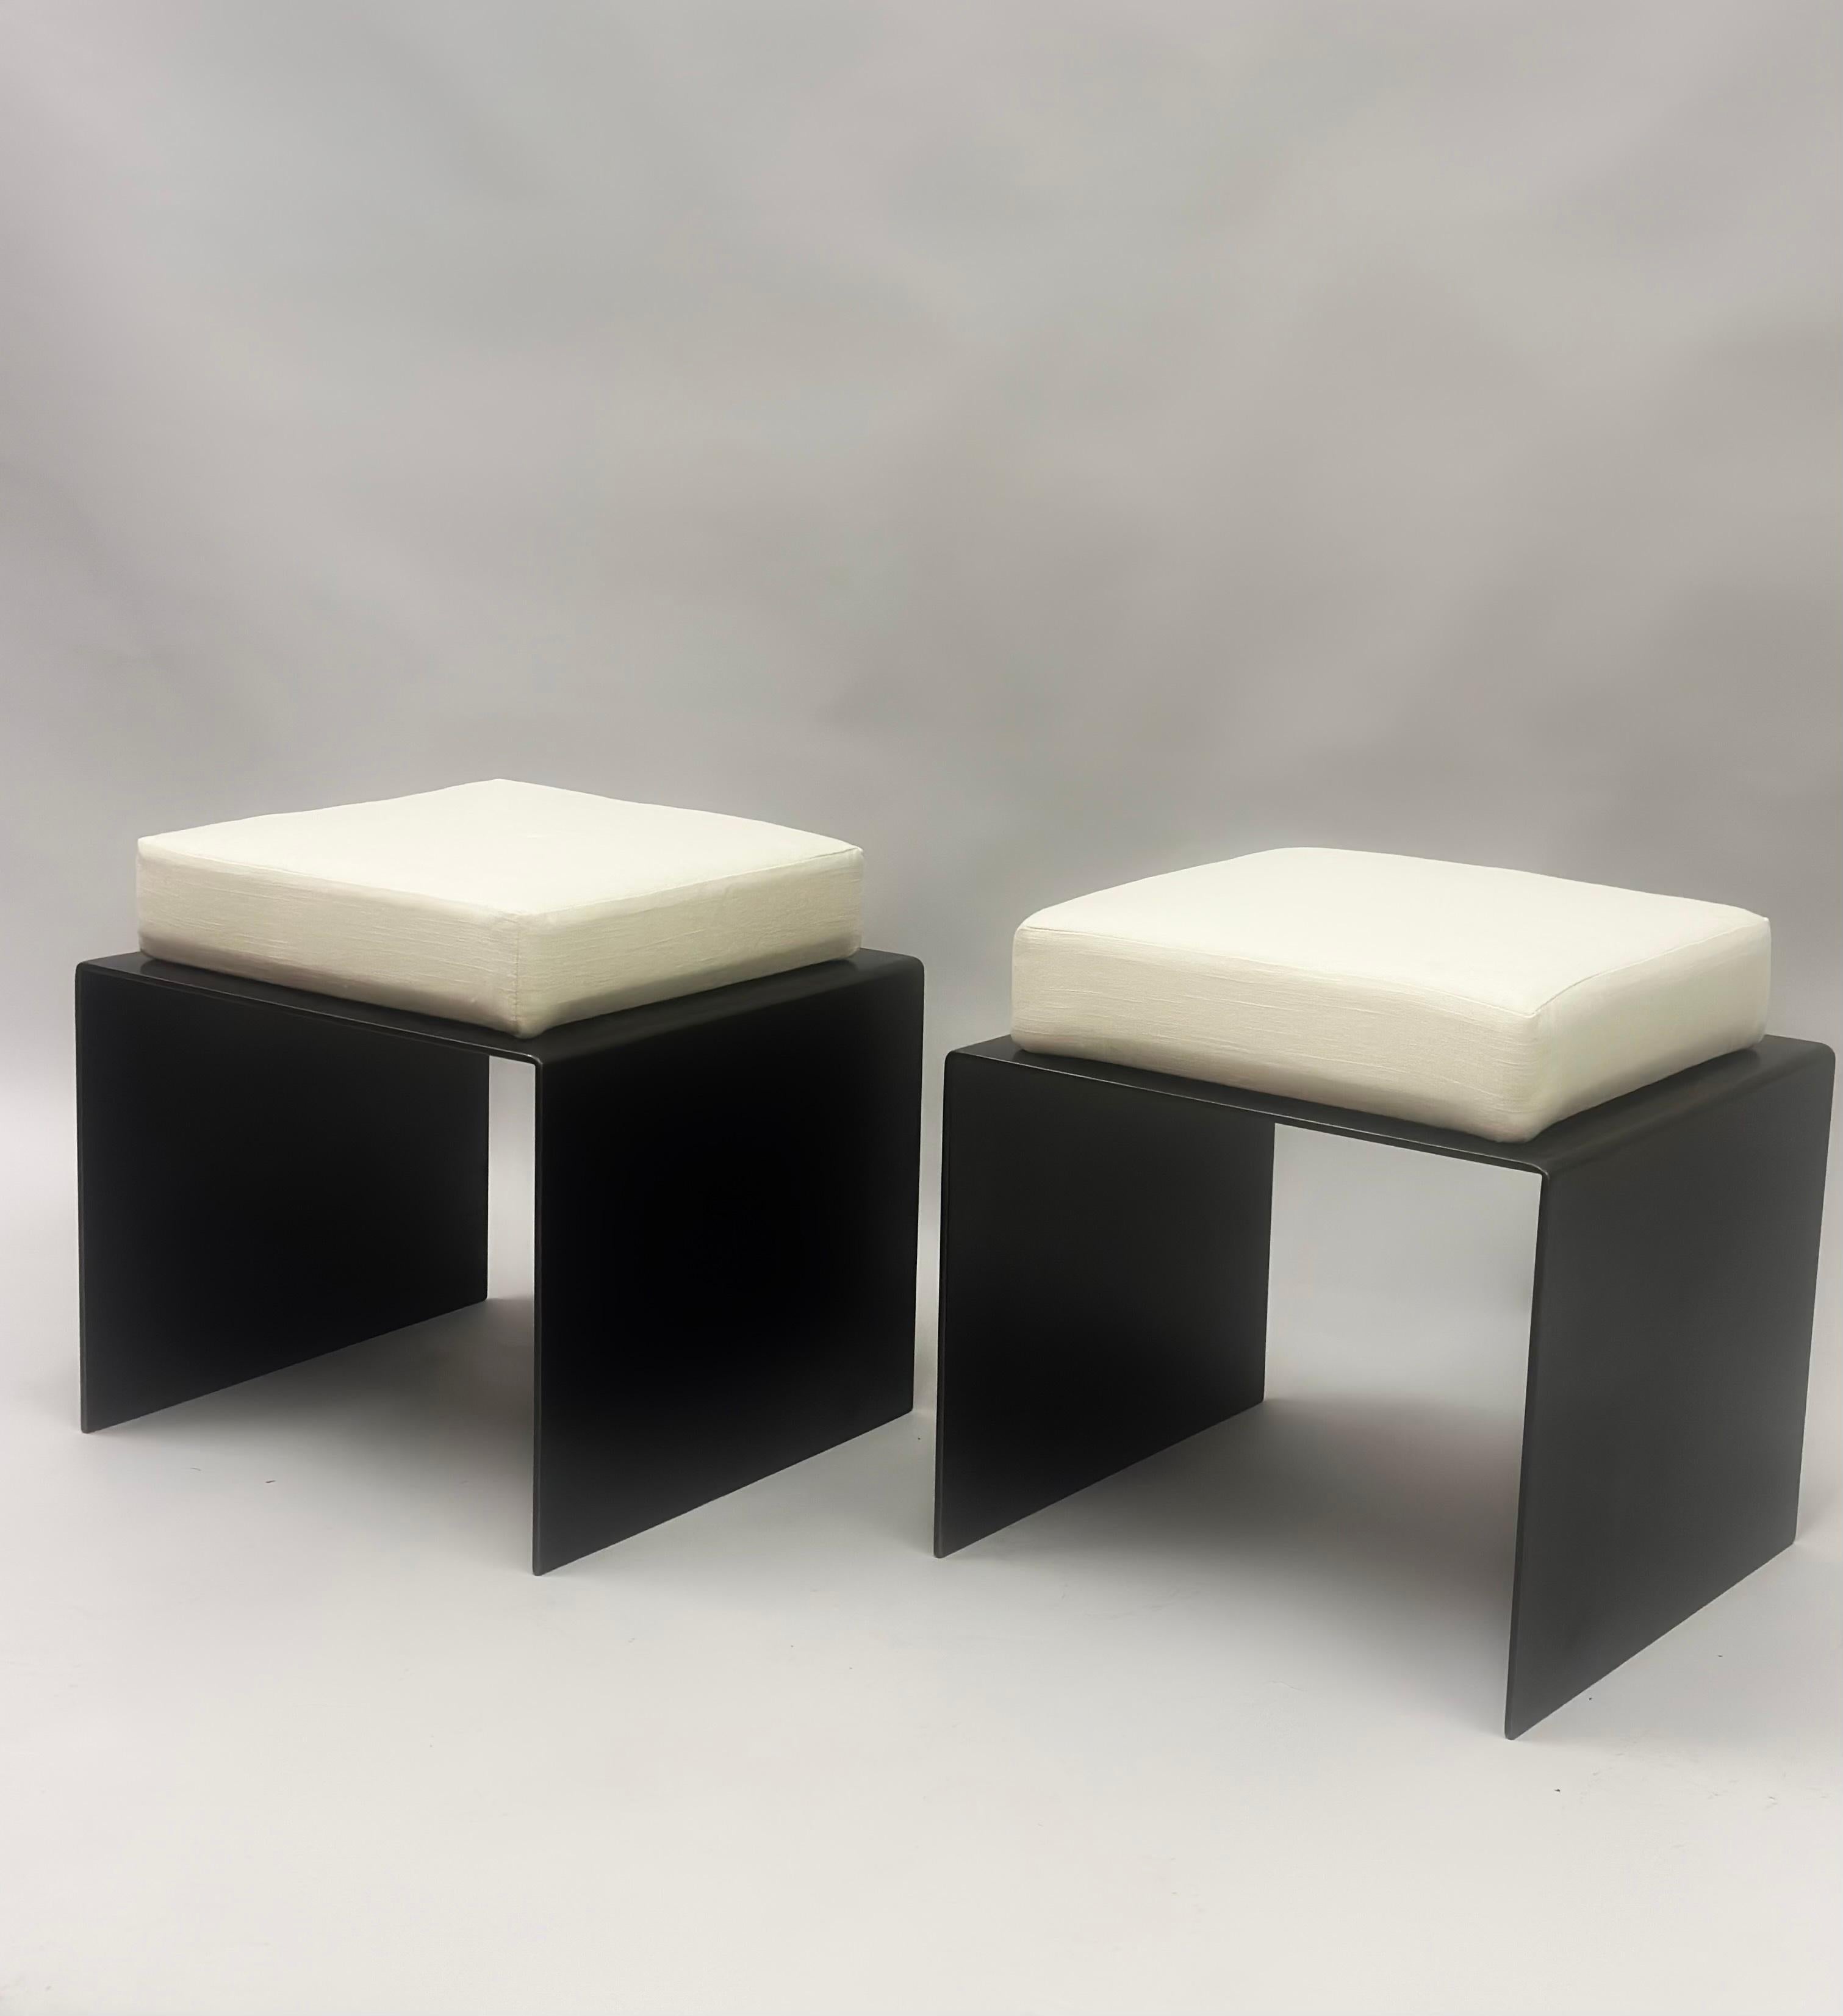 Elegant pair of French midcentury style Modernist stools / benches / ottomans with pure forms and elegant lines, constructed in wrought iron and with upholstered cotton seats. The pieces achieve a perfect balance of form and function. They please